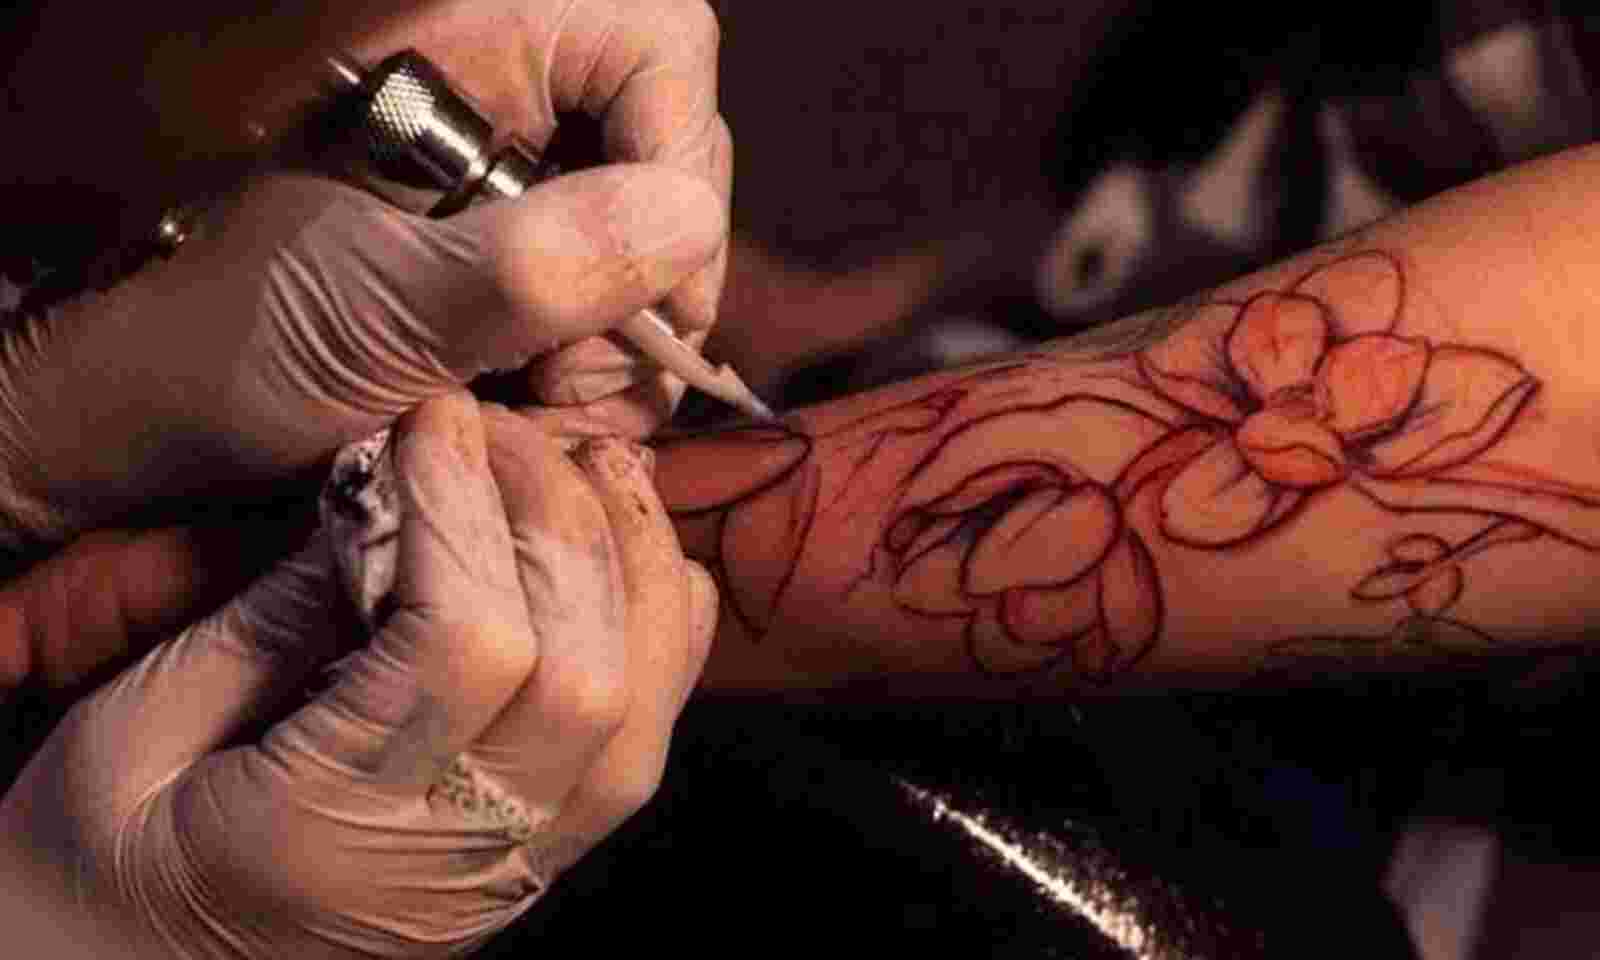 Bangkoks All Day Tattoo offers tips for those wanting to get inked  photos  CNN